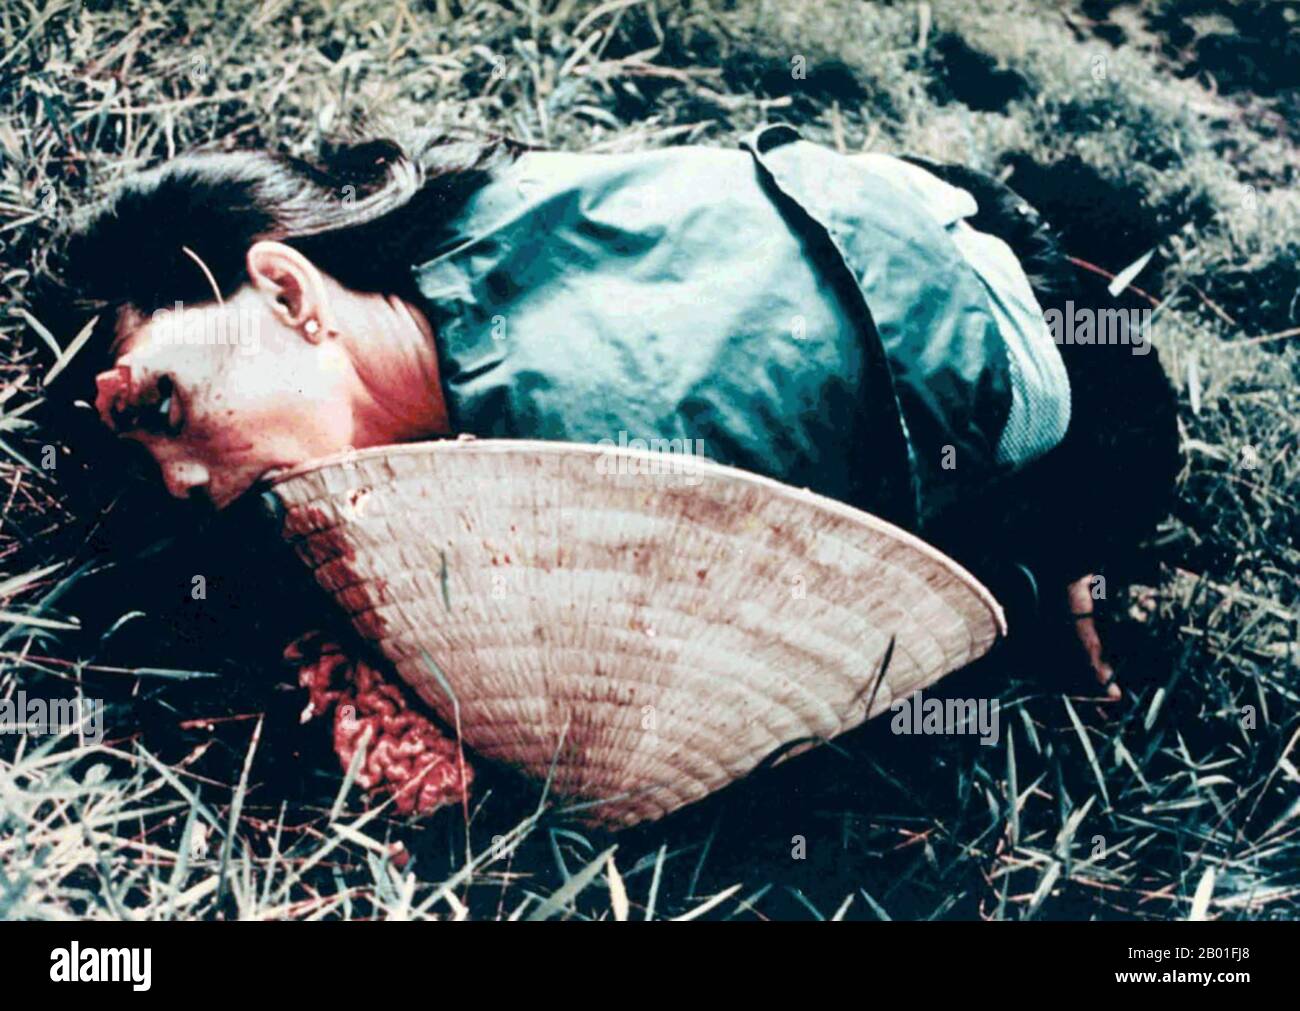 Vietnam: A female victim of the My Lai massacre or Thảm sát Mỹ Lai, March 6, 1868. Photo by Sgt. Ronald L. Haeberle.  The My Lai Massacre was the Vietnam War mass murder of 347–504 unarmed civilians in South Vietnam on March 16, 1968, by United States Army soldiers of 'Charlie' Company of 1st Battalion, 20th Infantry Regiment, 11th Brigade of the Americal Division.  Most of the victims were women, children (including babies), and elderly people. Many were raped, beaten, and tortured, and some of the bodies were later found to be mutilated. Stock Photo